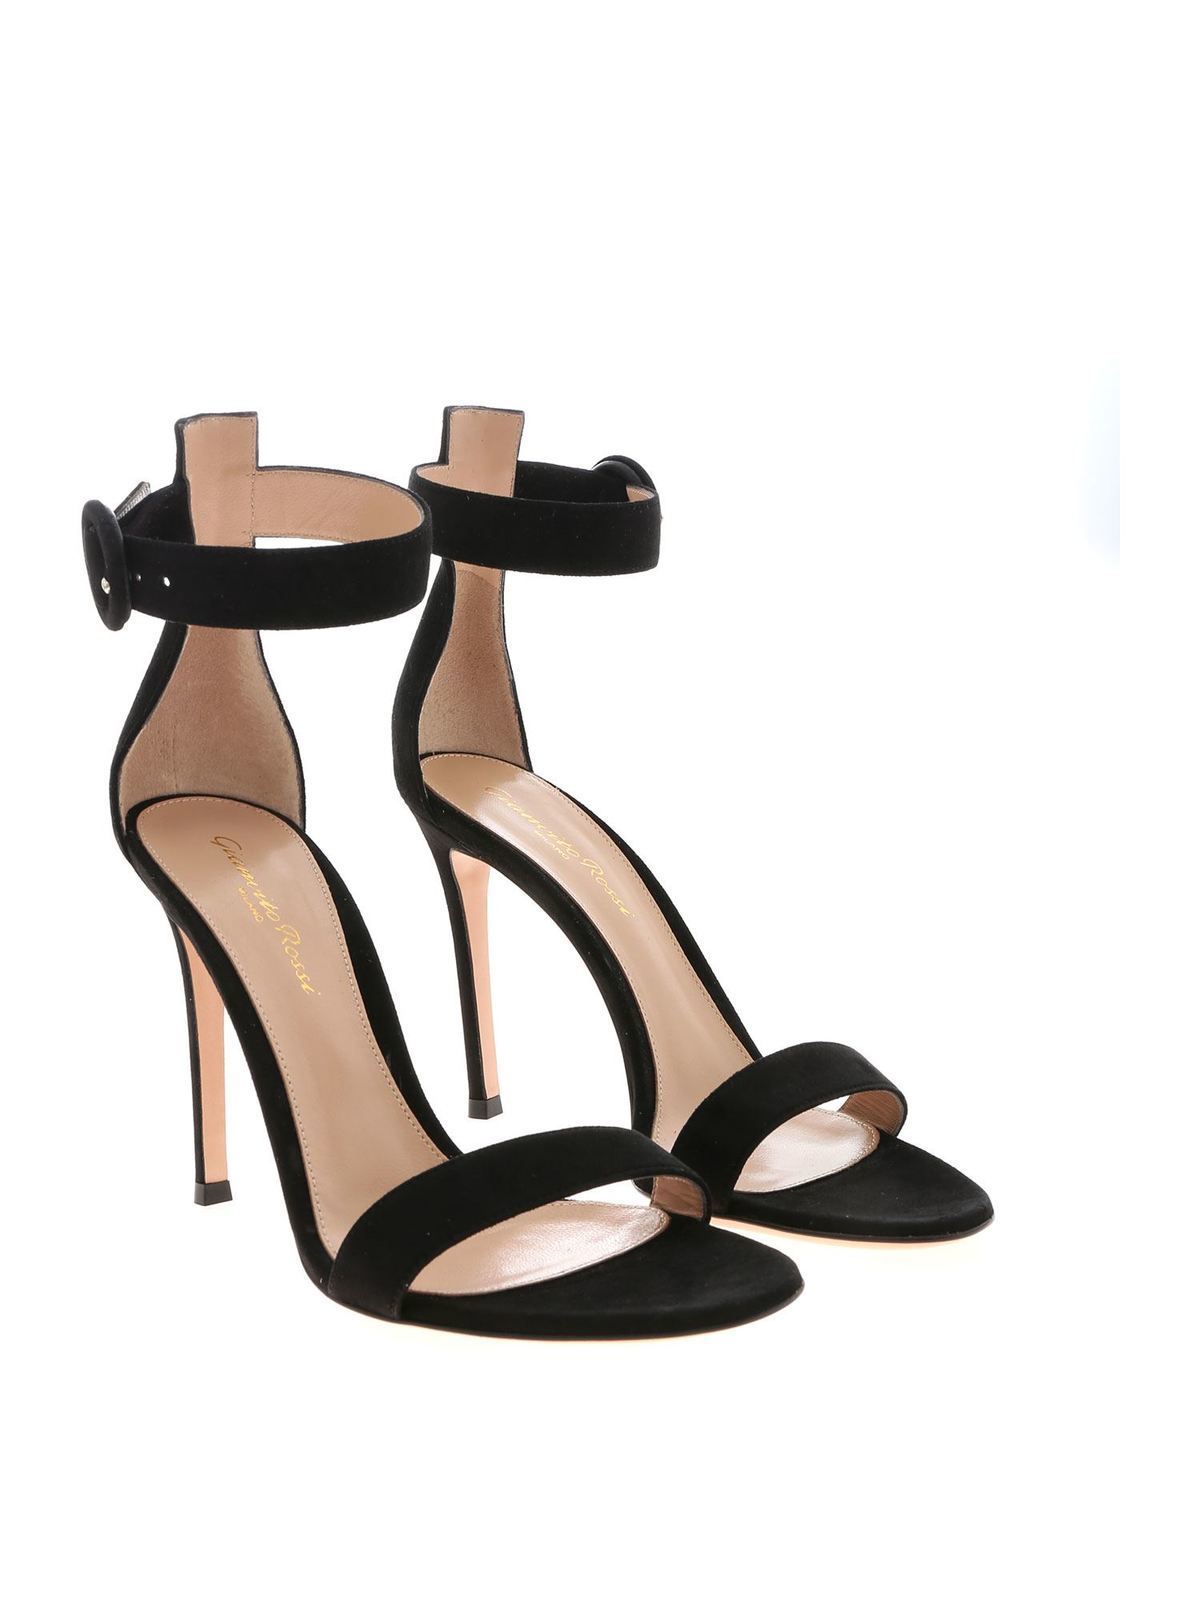 Buy GIANVITO ROSSI Knotted 105mm Strappy Sandals - Black At 70% Off |  Editorialist